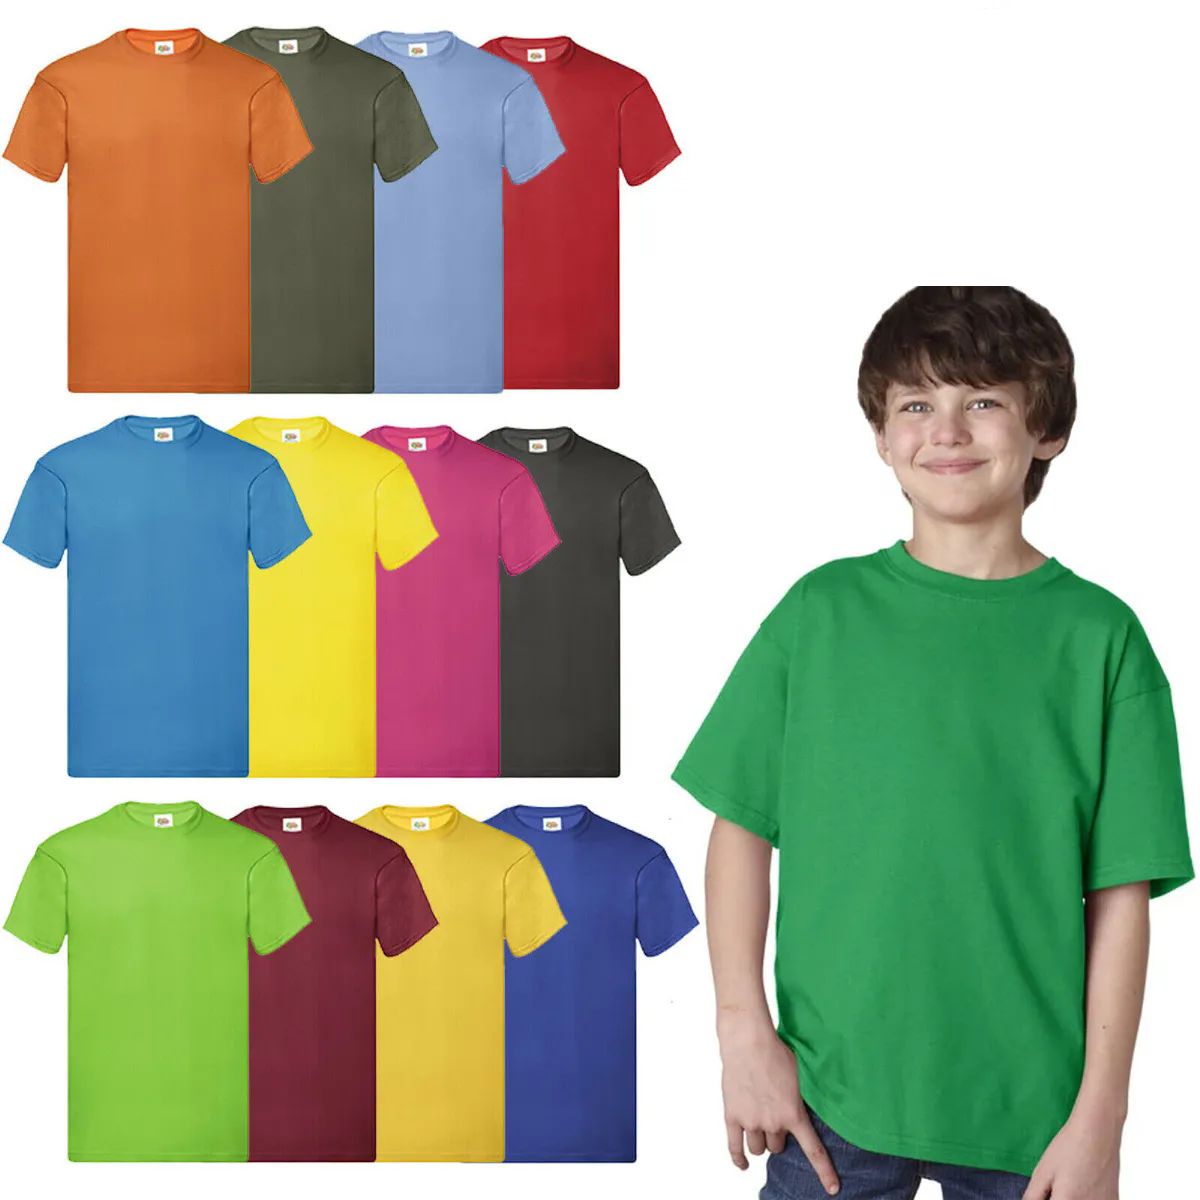 24 Pieces of Billionhats Kids Youth Cotton Assorted Colors T-Shirts Size Medium